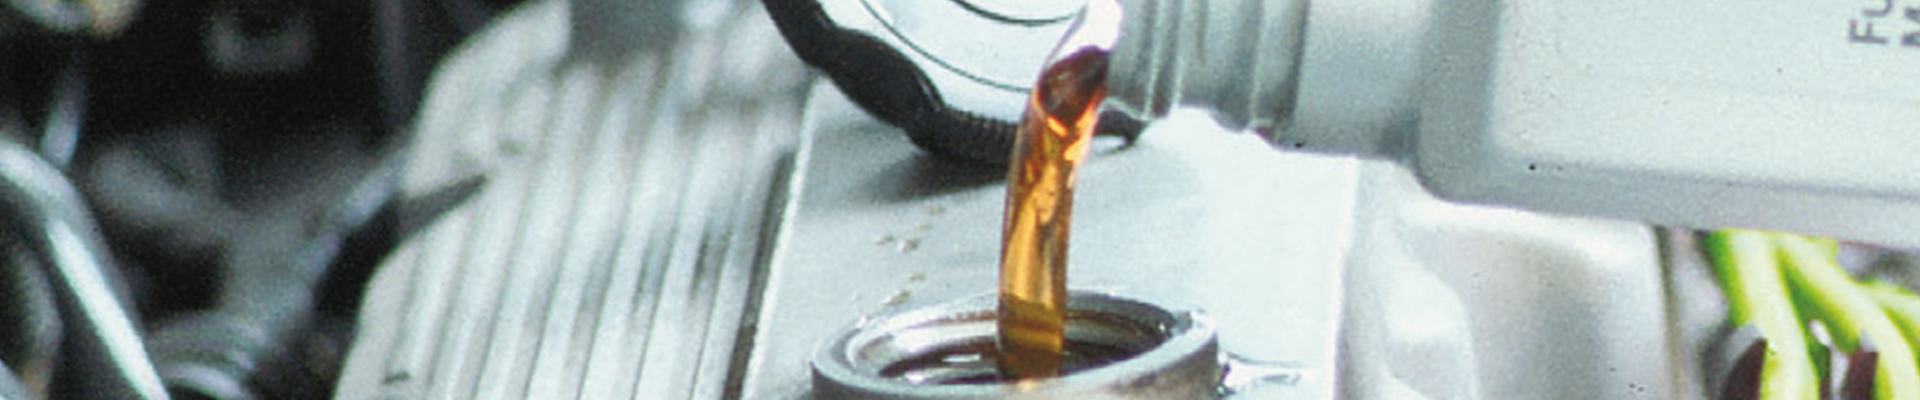 Engine oil being poured into a car engine